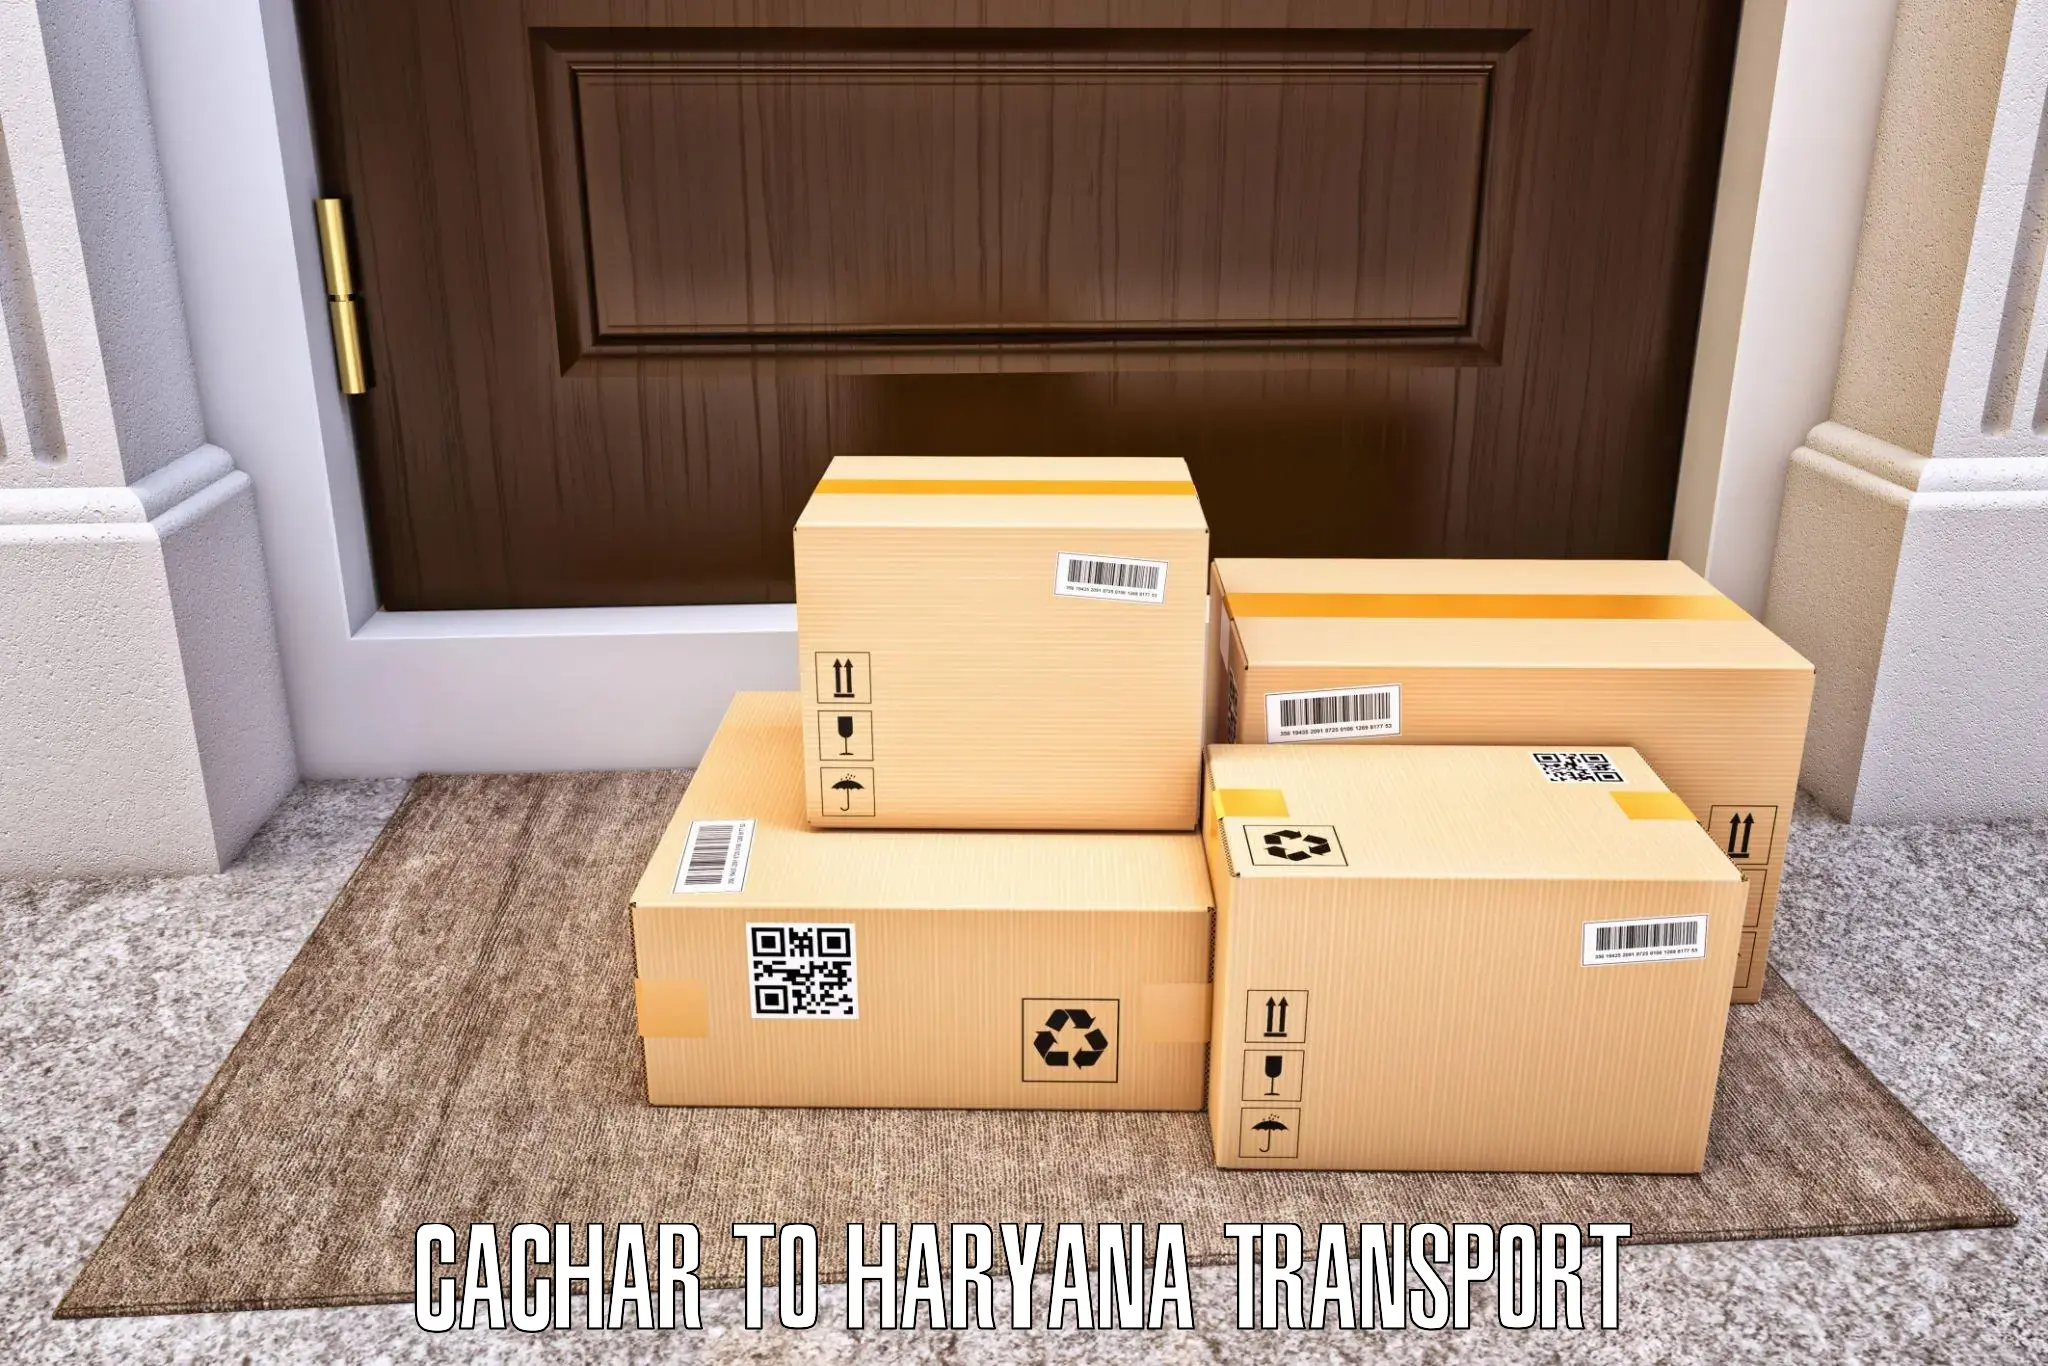 Transportation services Cachar to Sonipat